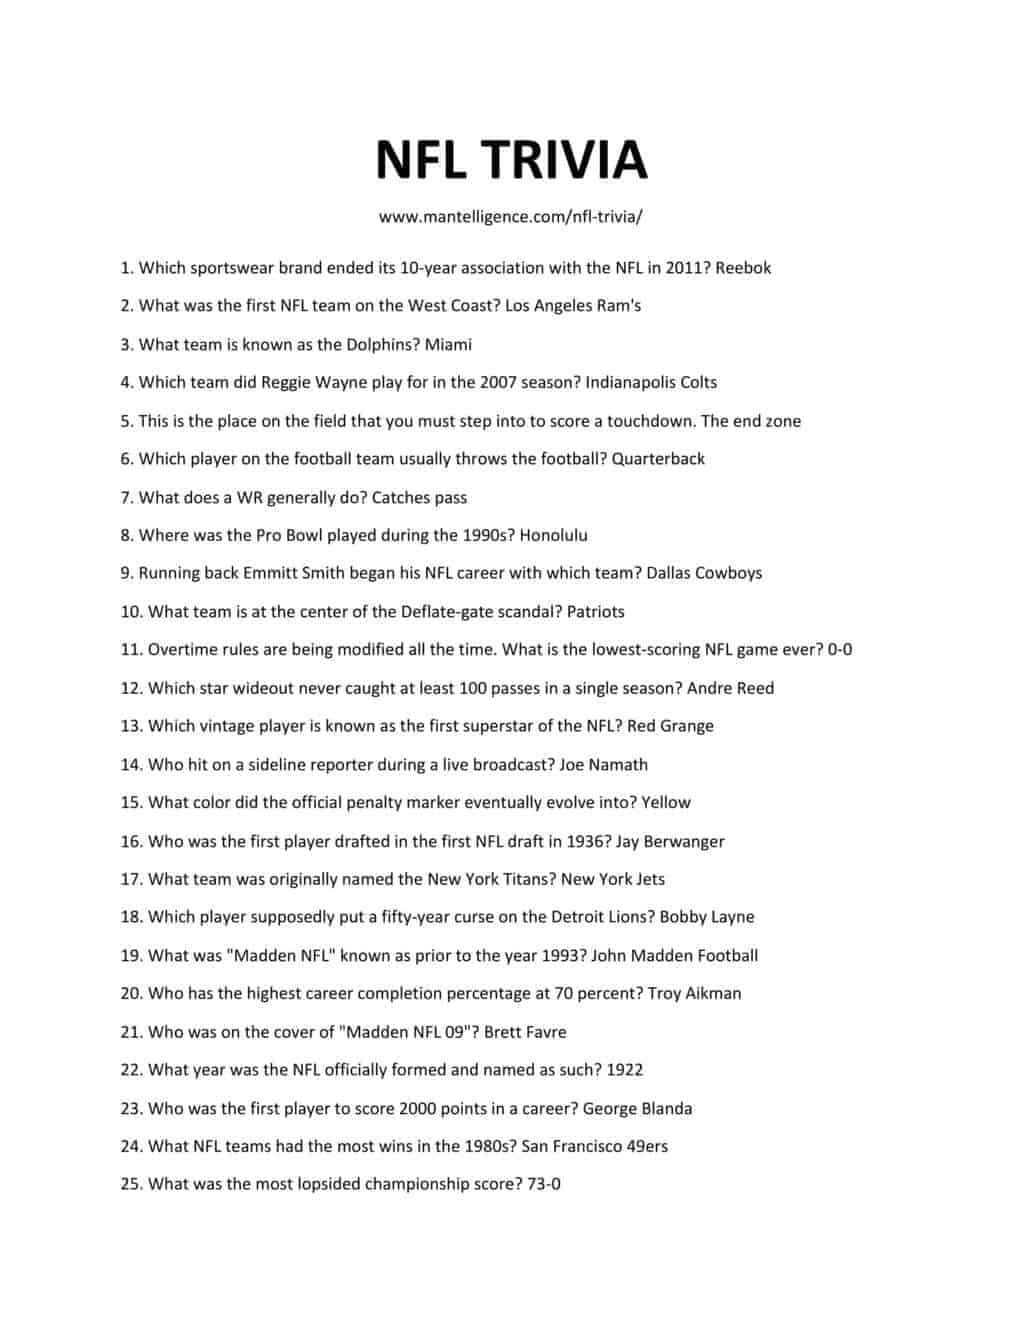 30 Best NFL Trivia Questions And Answers The Only List You 39 ll Need